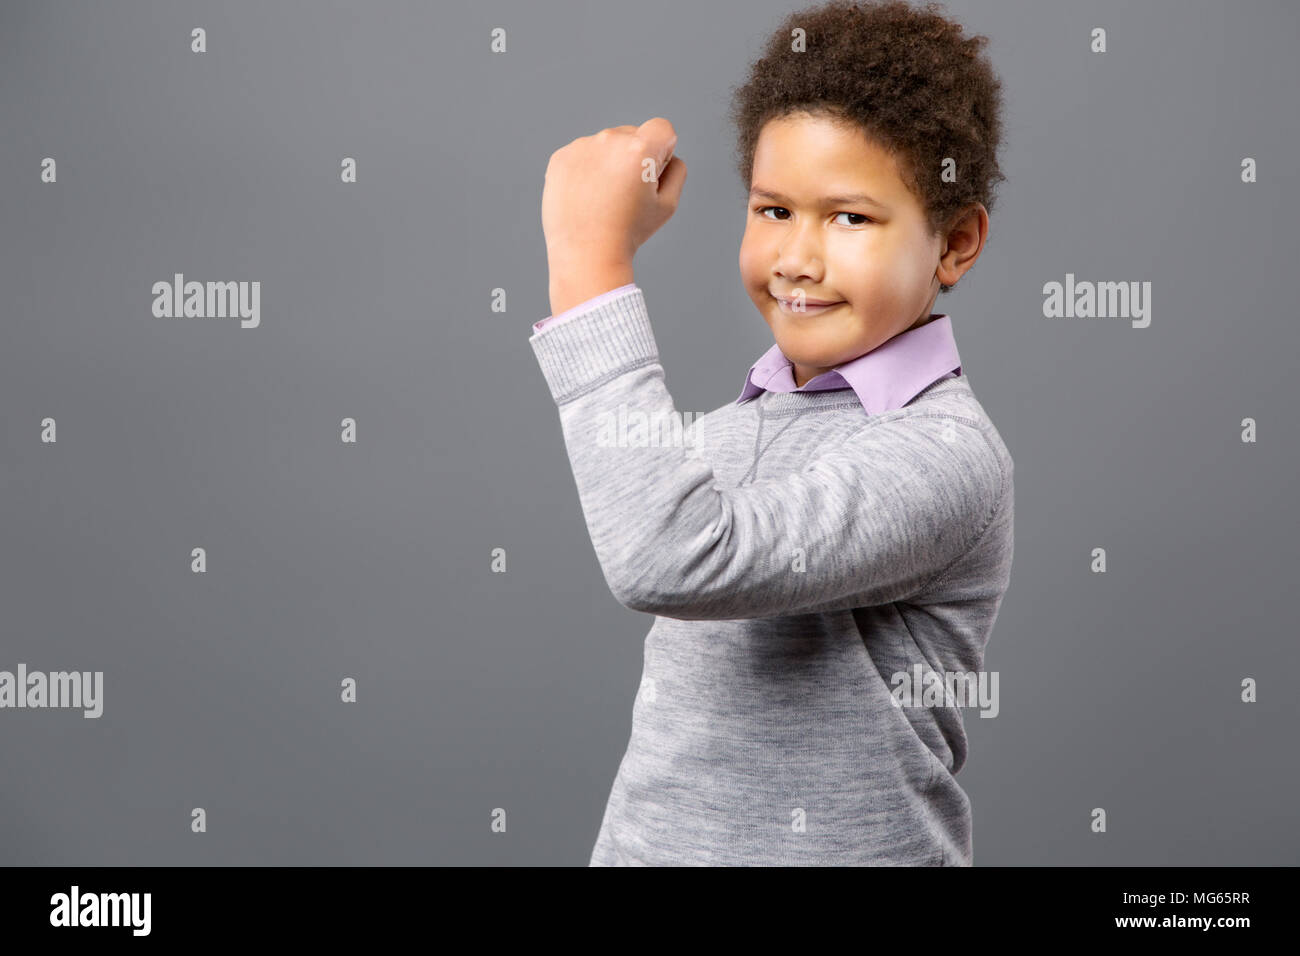 Nice cute boy showing his muscles Stock Photo